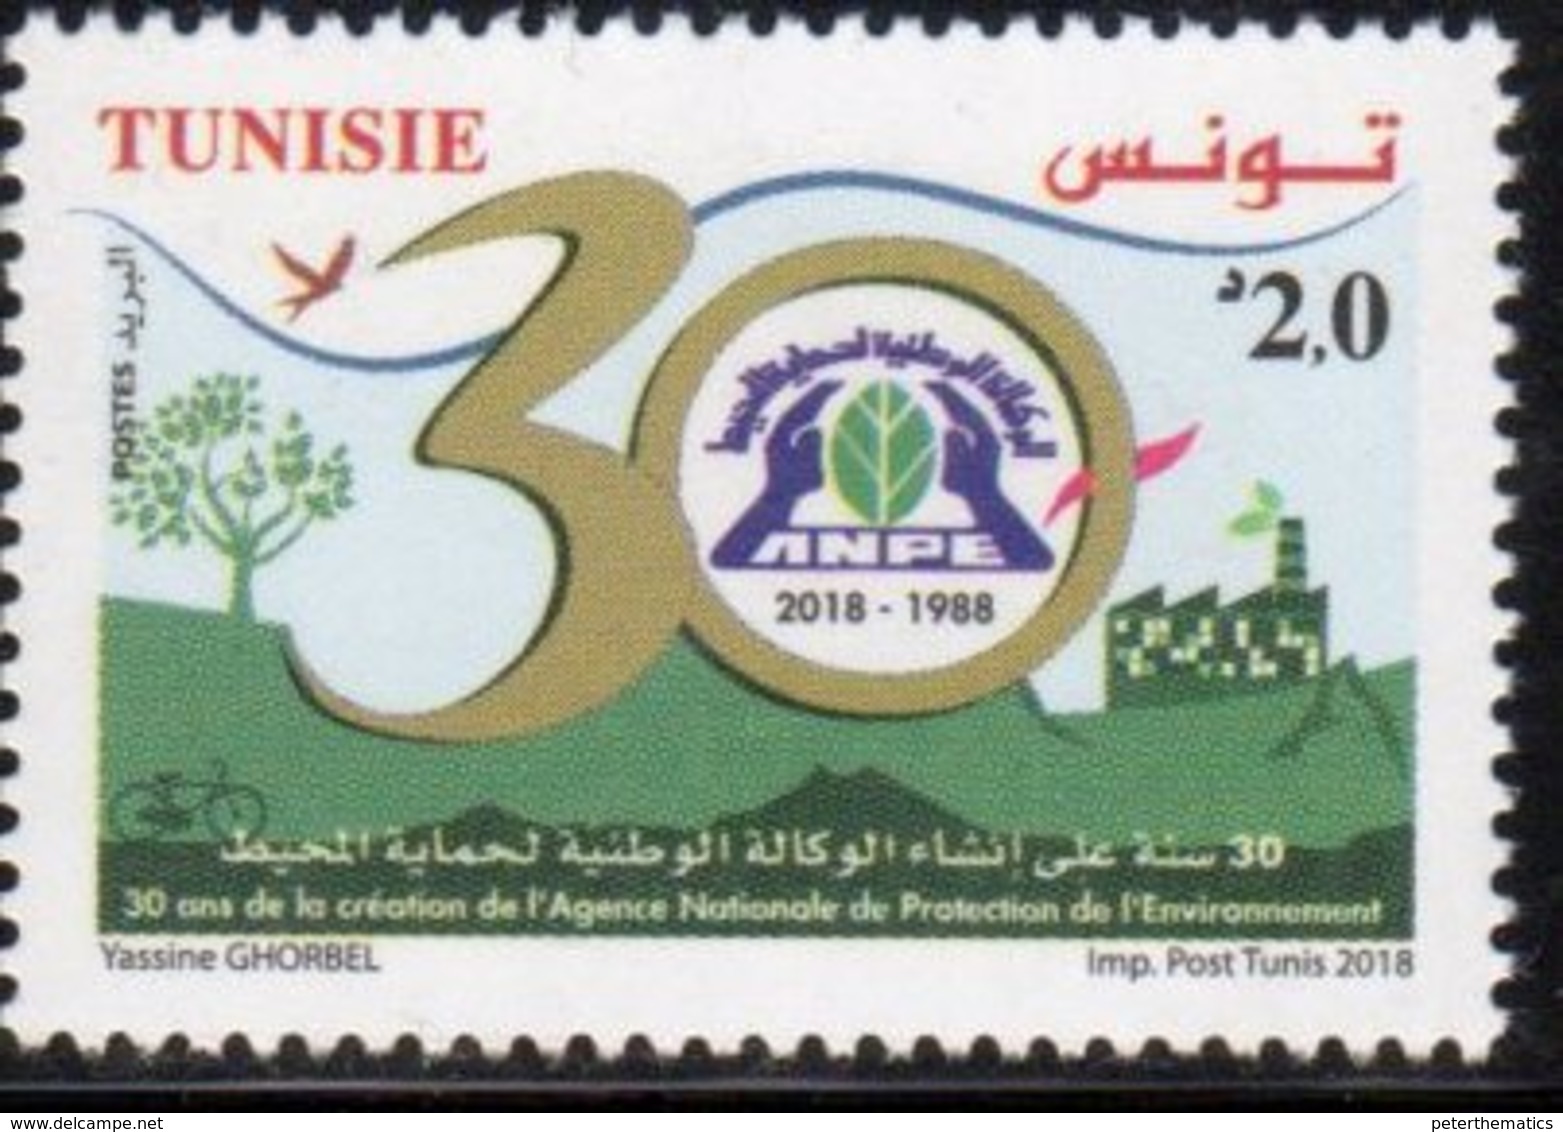 TUNISIA, 2018, MNH, ENVIRONMENT PROTECTION AGENCY, TREES, BIRDS, INDUSTRY,  1v - Environment & Climate Protection